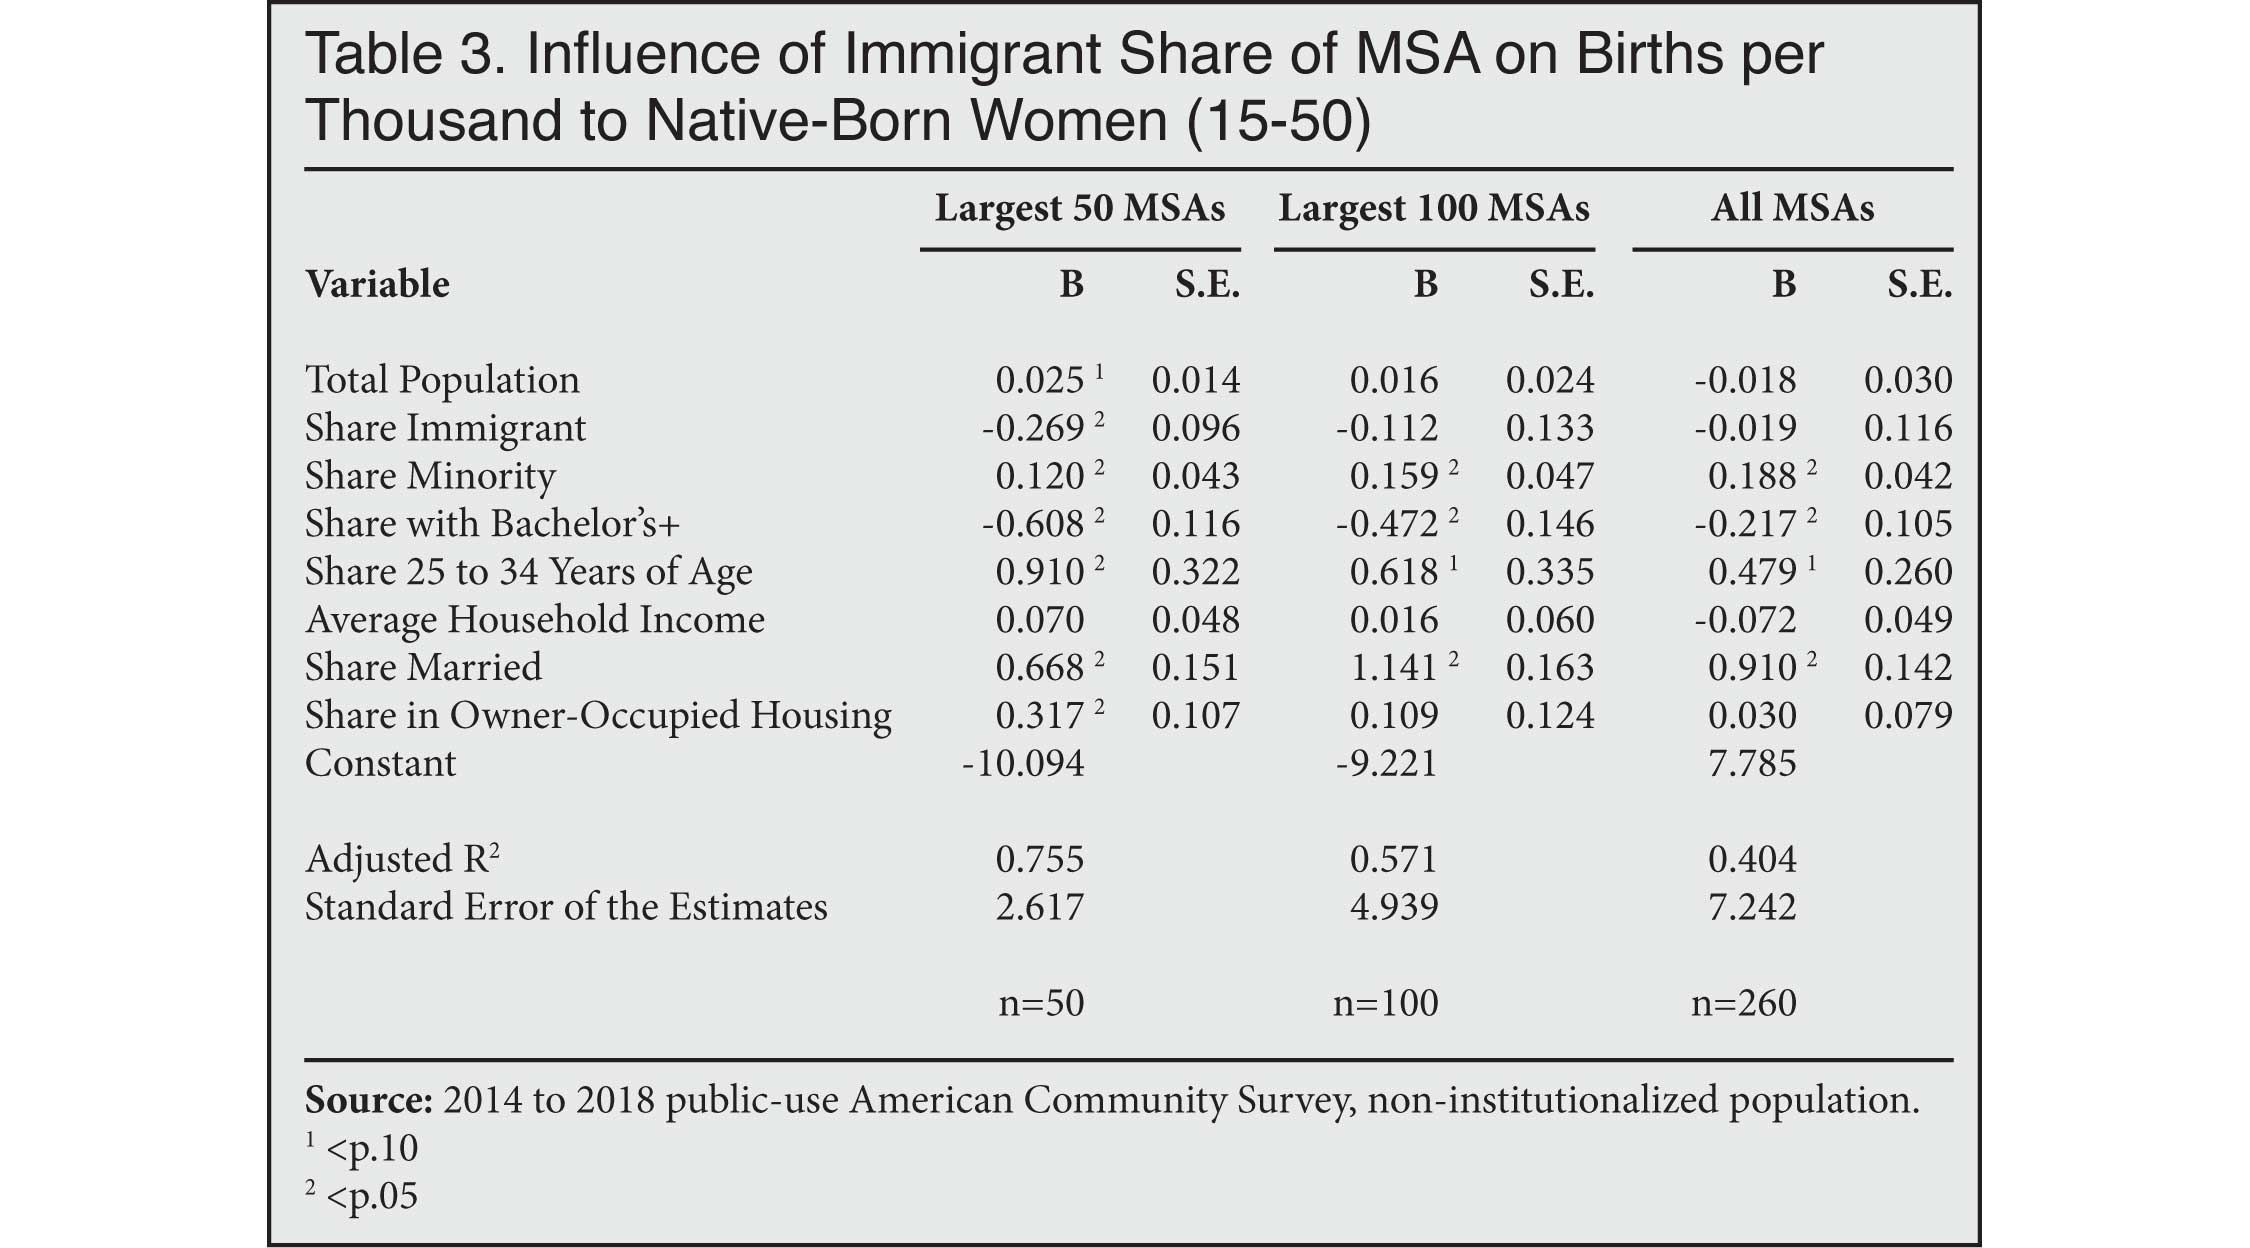 Table: Influence of Immigrant Share of MSA on Births per Thousand to Native Born Women 15-50